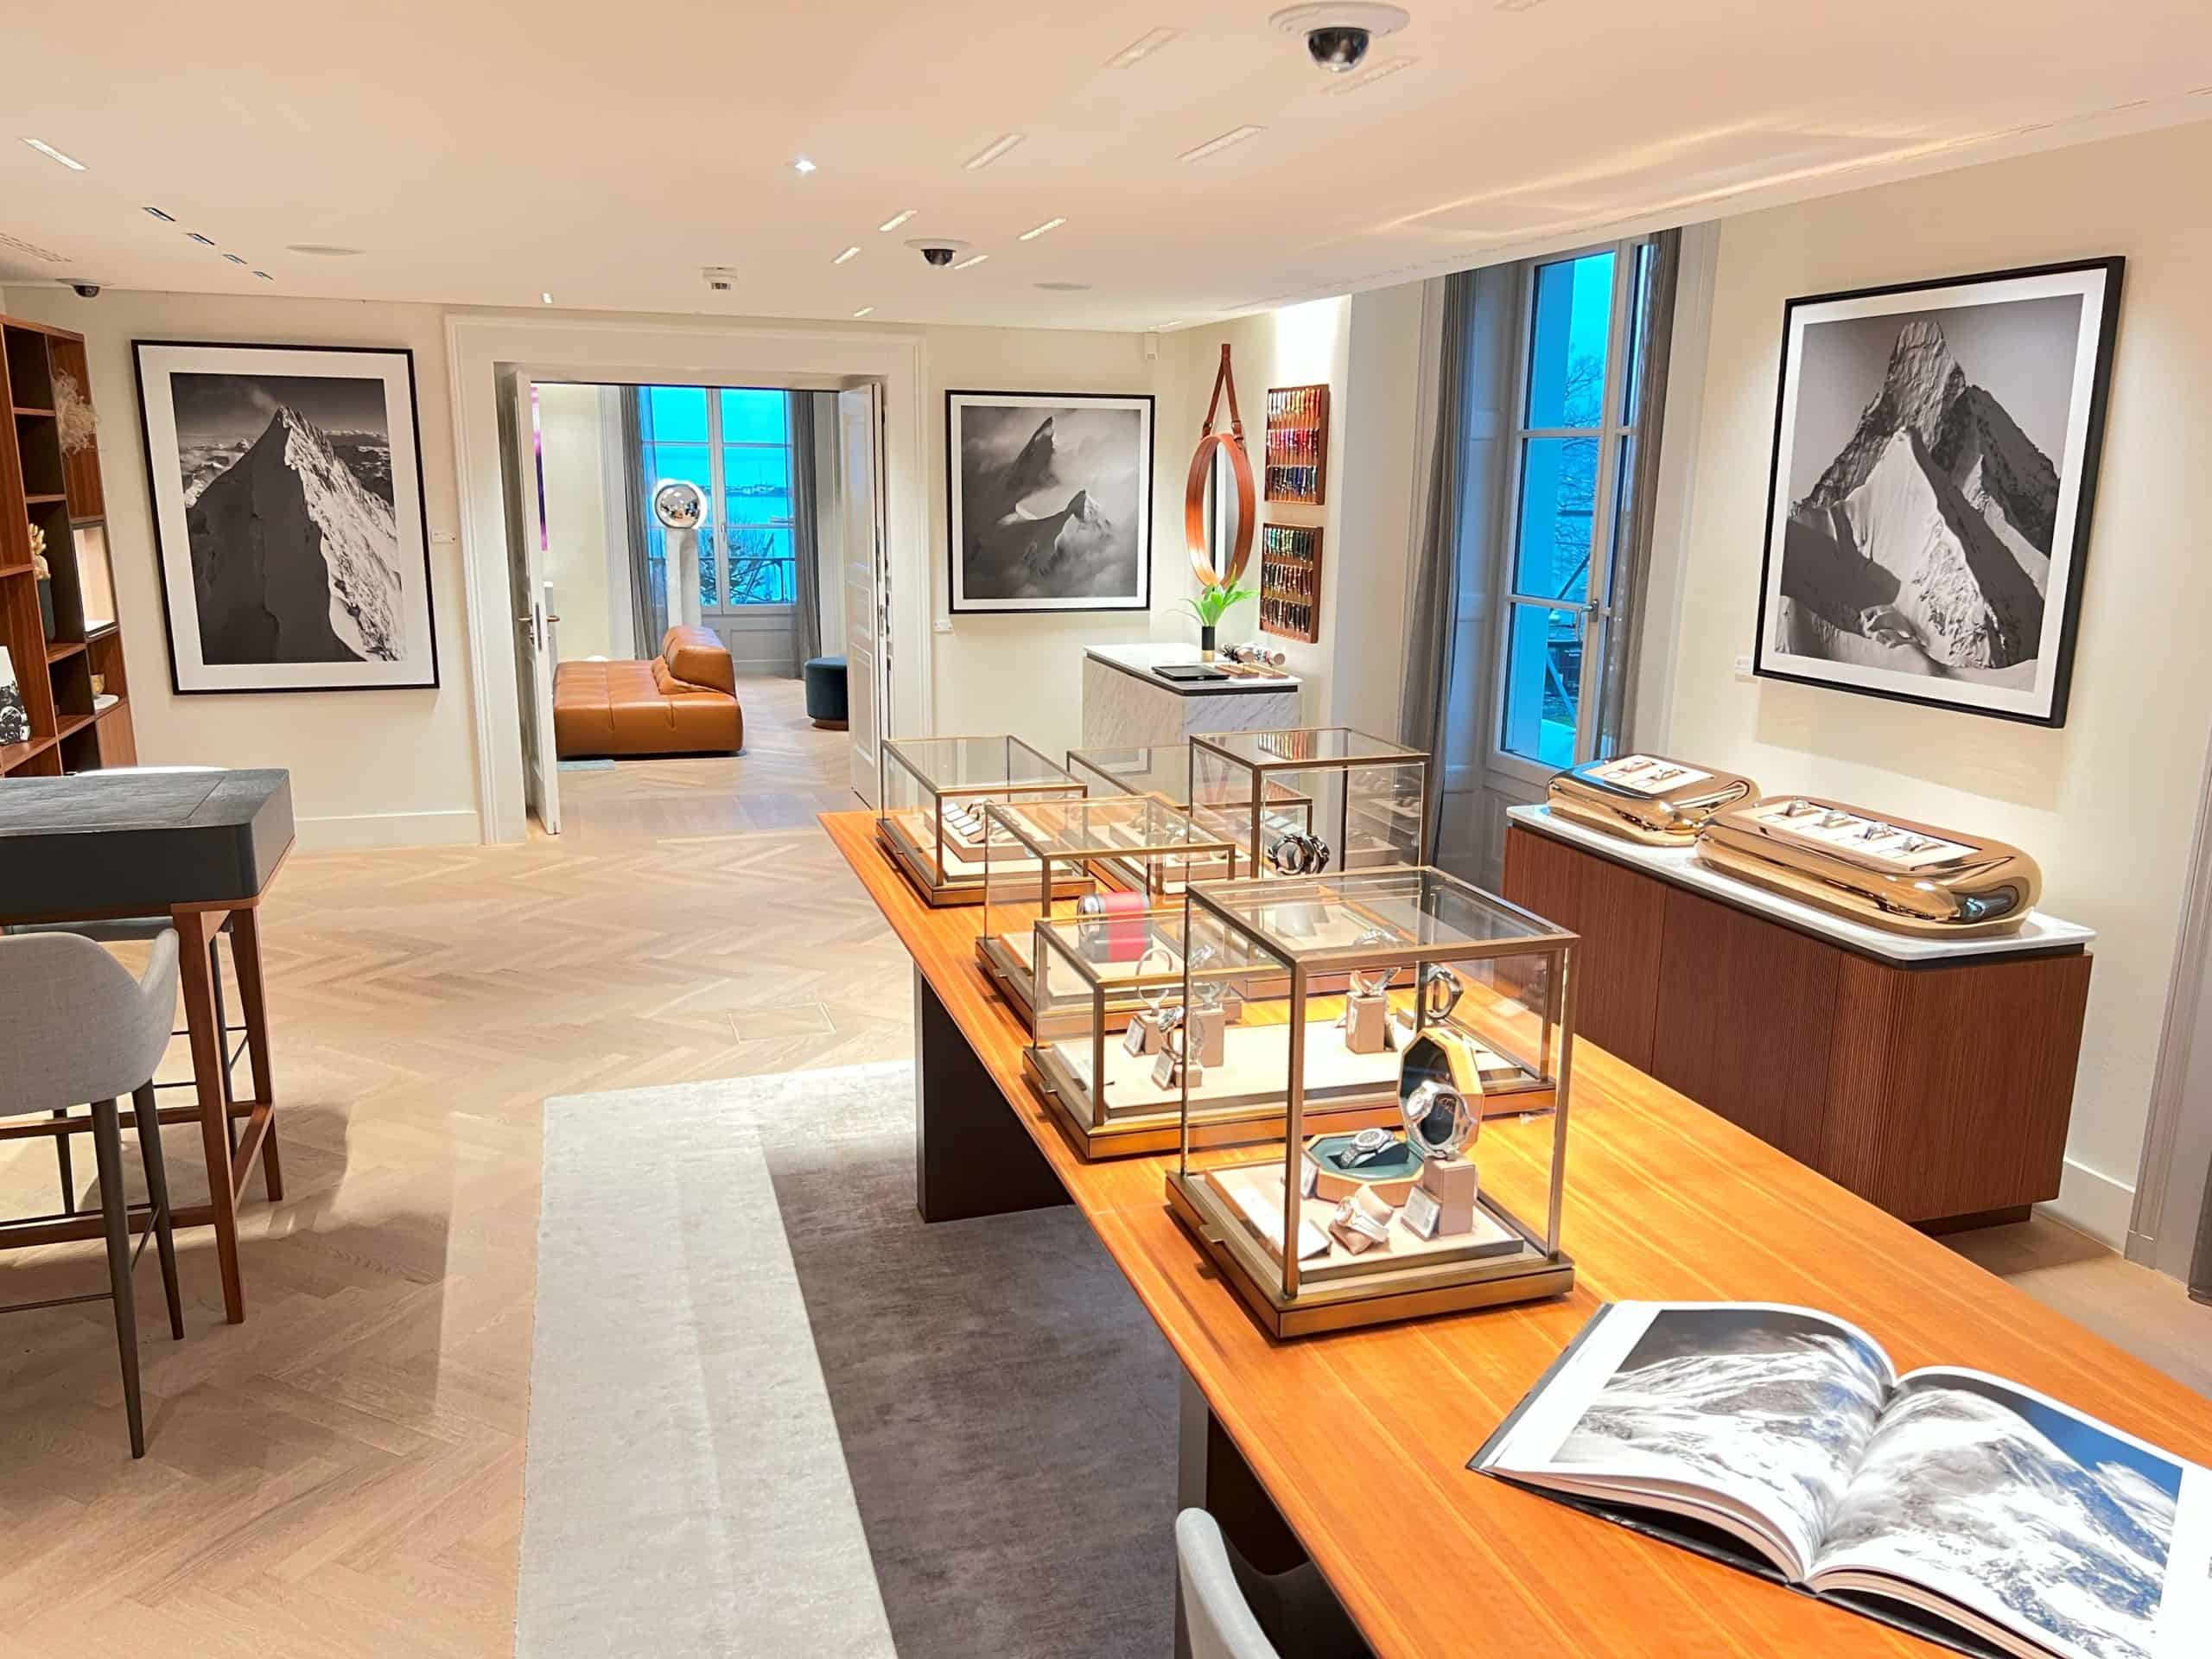 Between watches and jewelry, the works of Thomas Crauwels sublimate the walls of the Bucherer Gallery